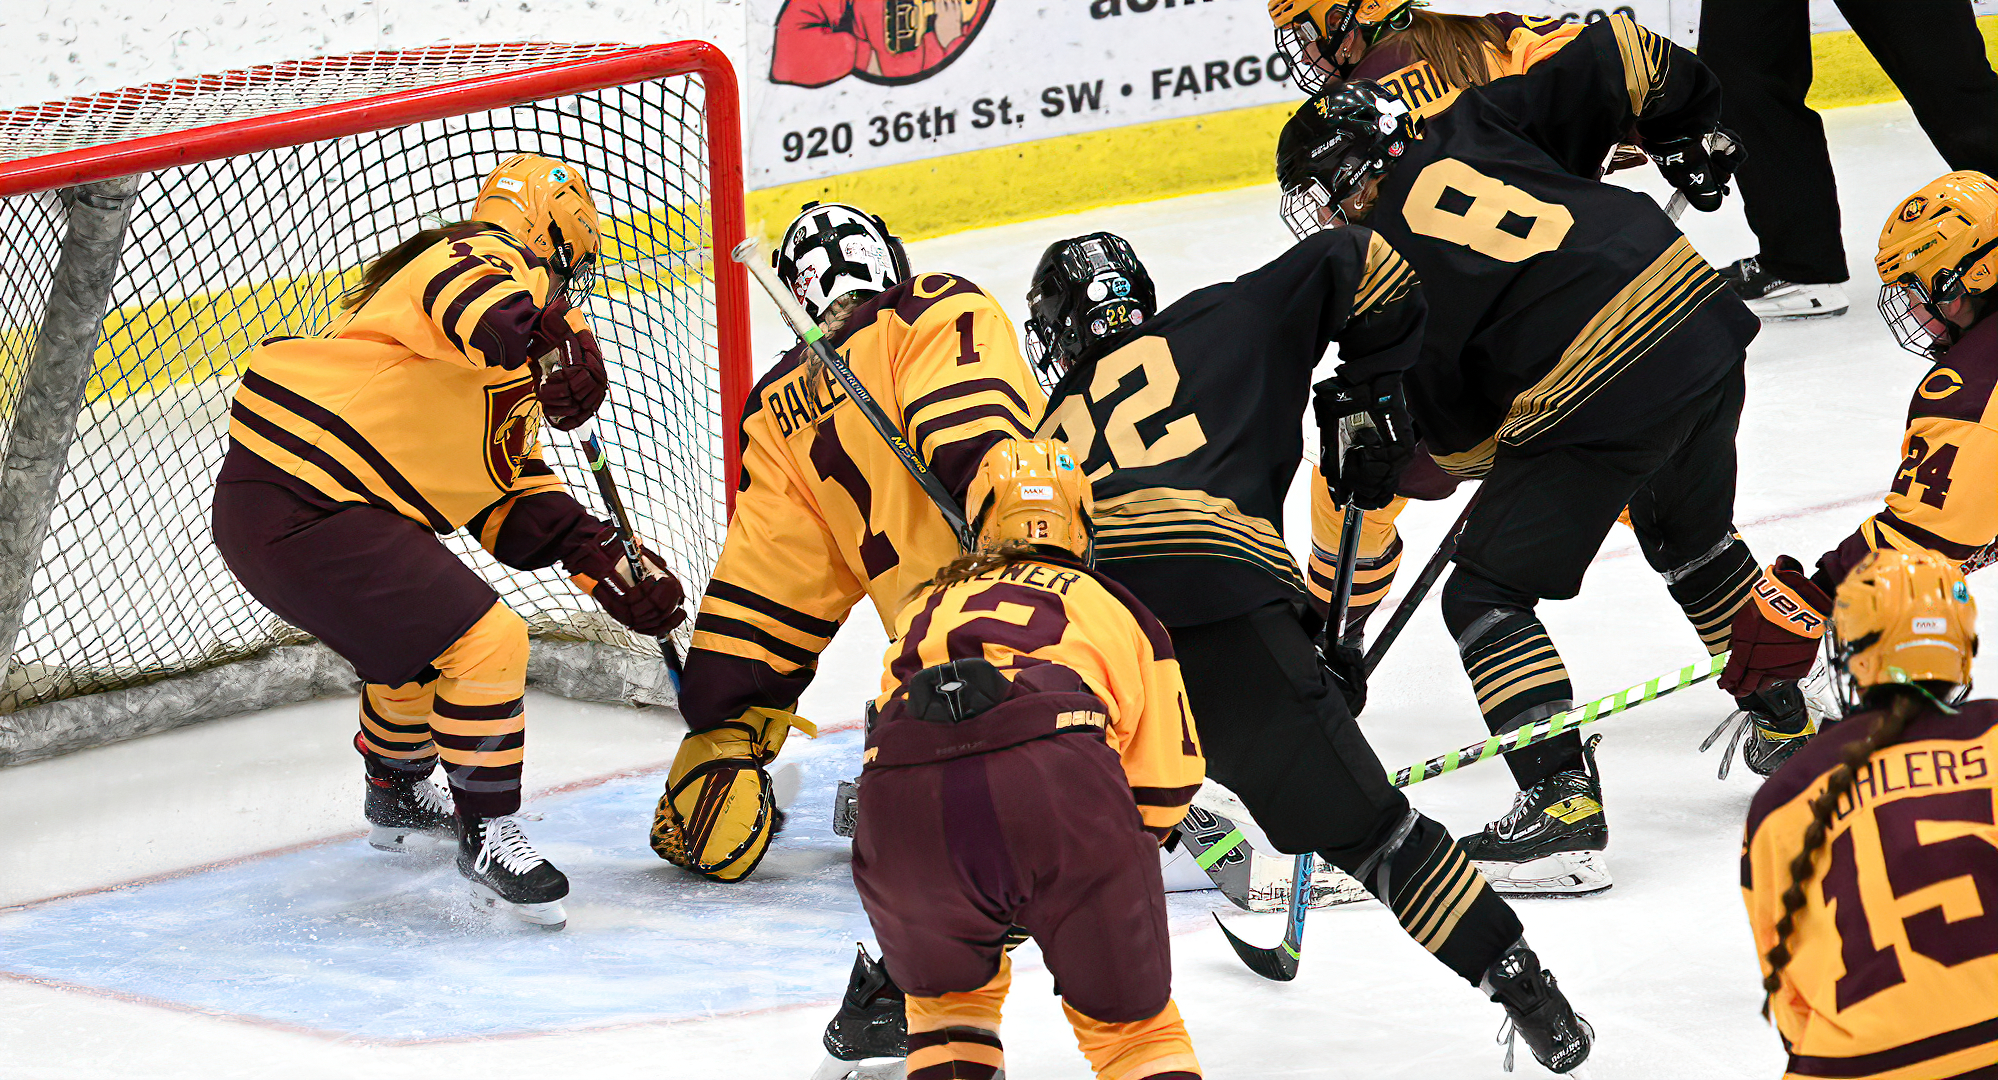 Lila Lanctot (far left) reaches behind goalie Hailee Bailey to stop the puck from crossing the goal line during the Cobbers' game with St. Olaf.